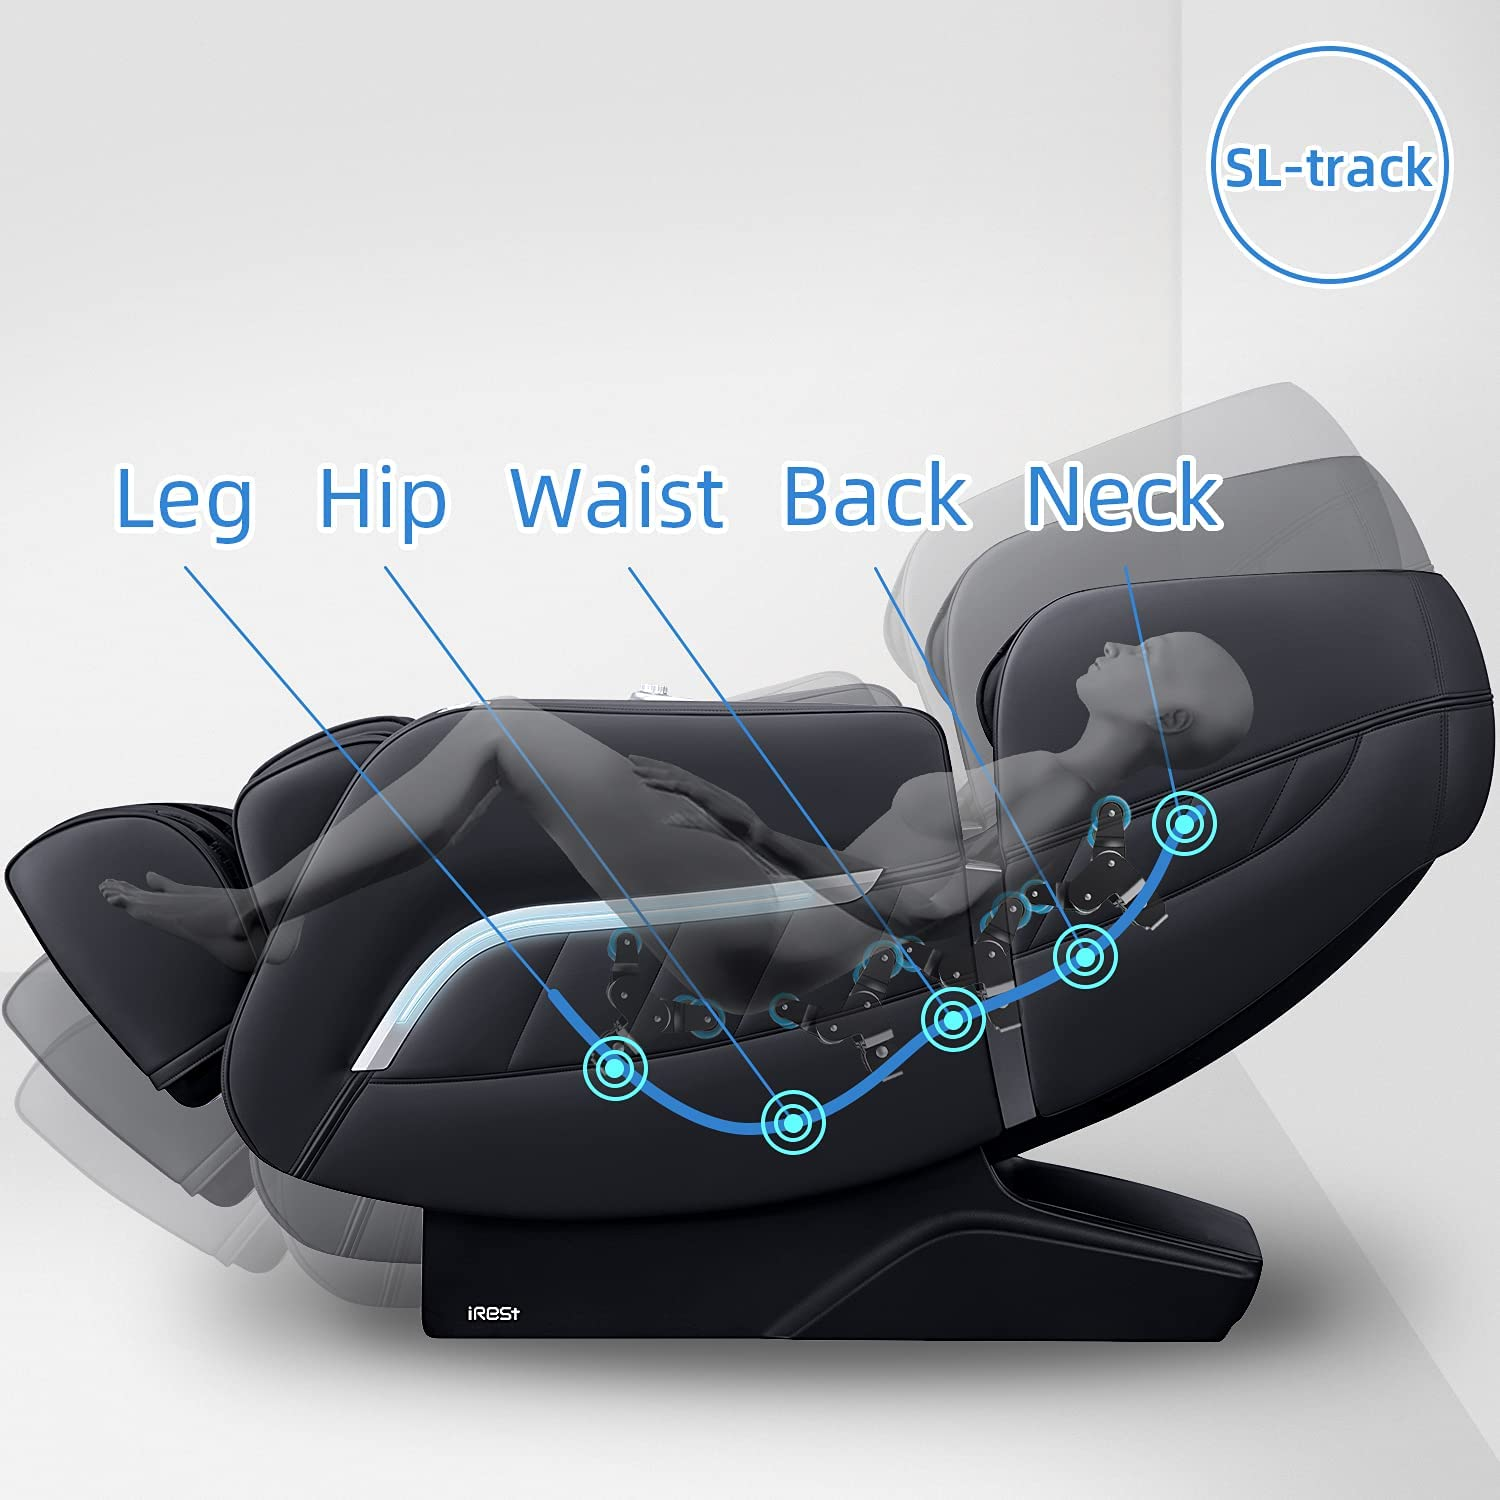 Find a massage chair that supports your health needs and helps alleviate muscle tension.